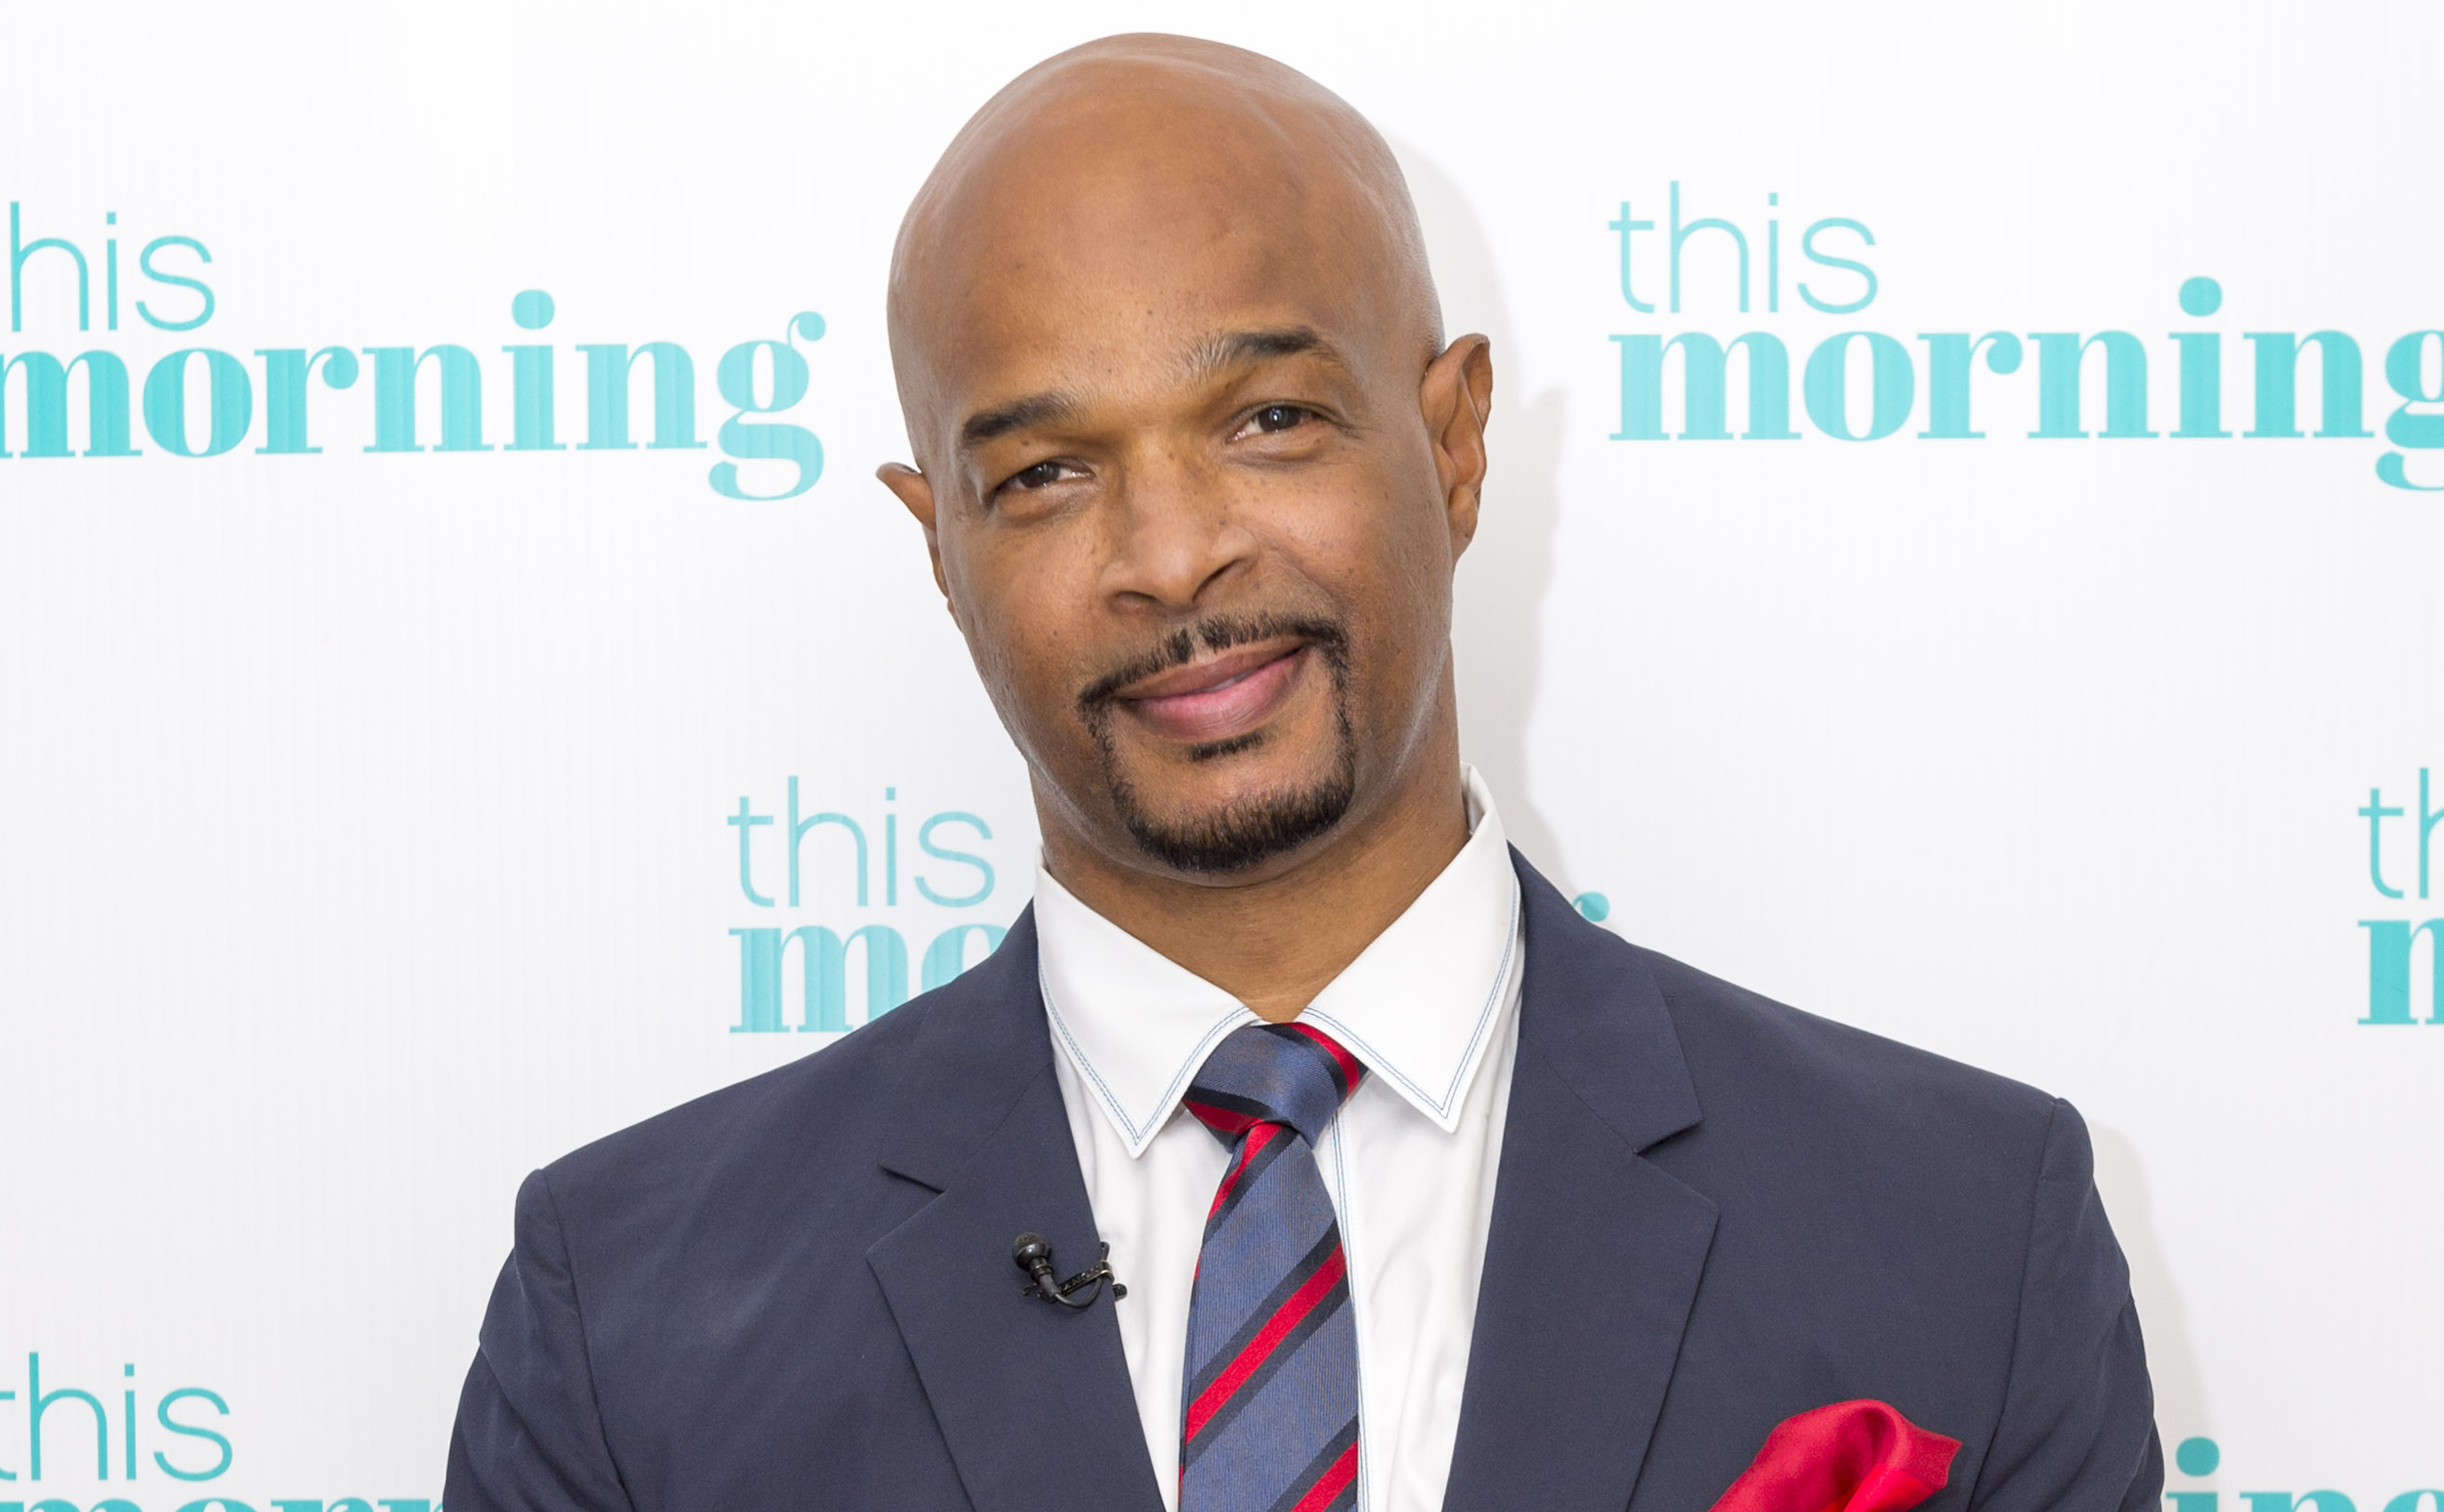 Damon Wayans is returning to multi-camera comedy with a new project at ABC, where he headlined and co-created hit family sitcom My Wife and Kids.